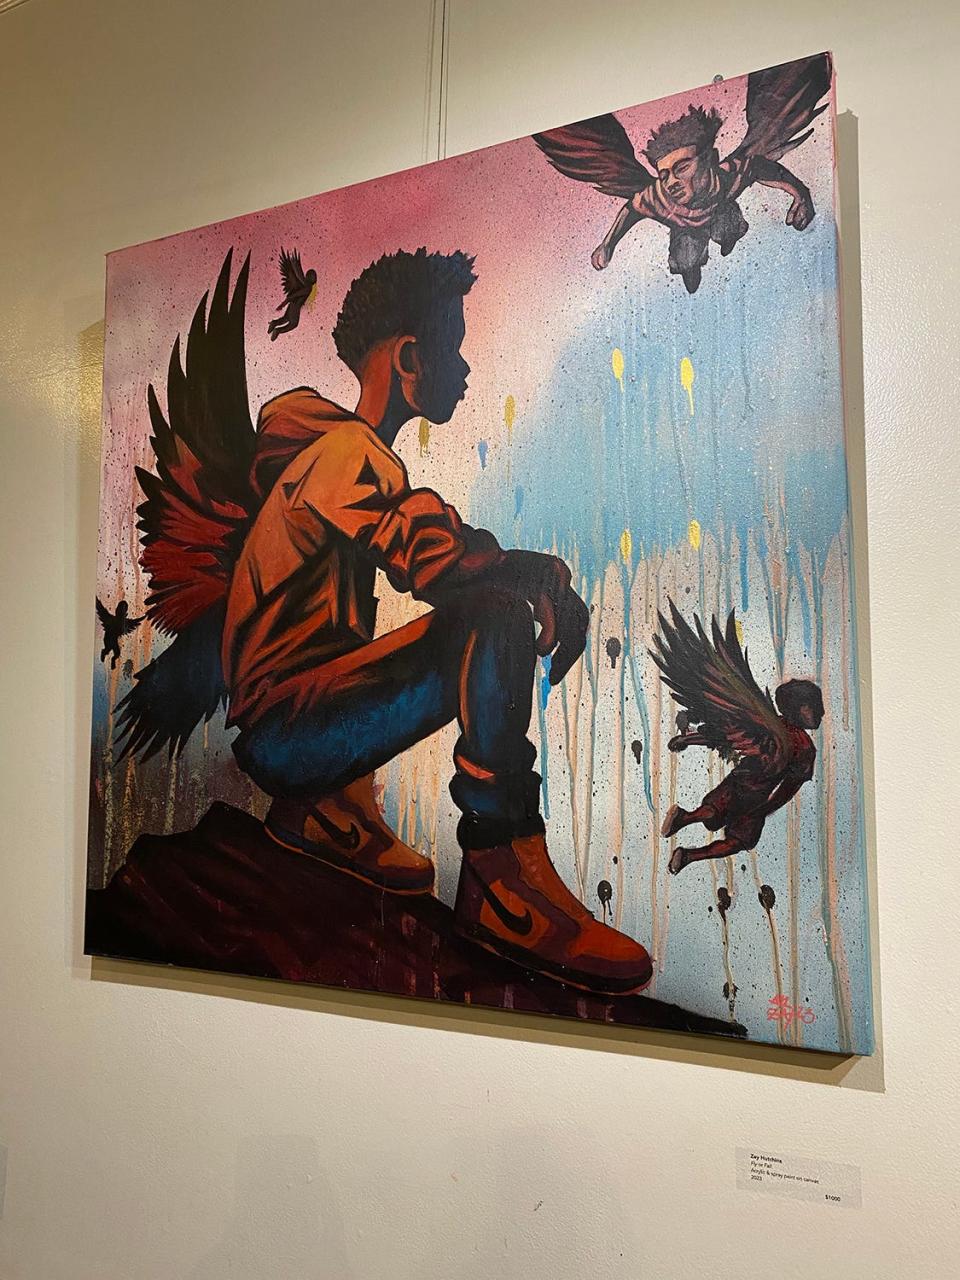 'Fly or Fall' by Zay Hutchins is featured in his exhibition Dripping Crown Chronicles at The Sentient Bean, 13 E. Park Ave.